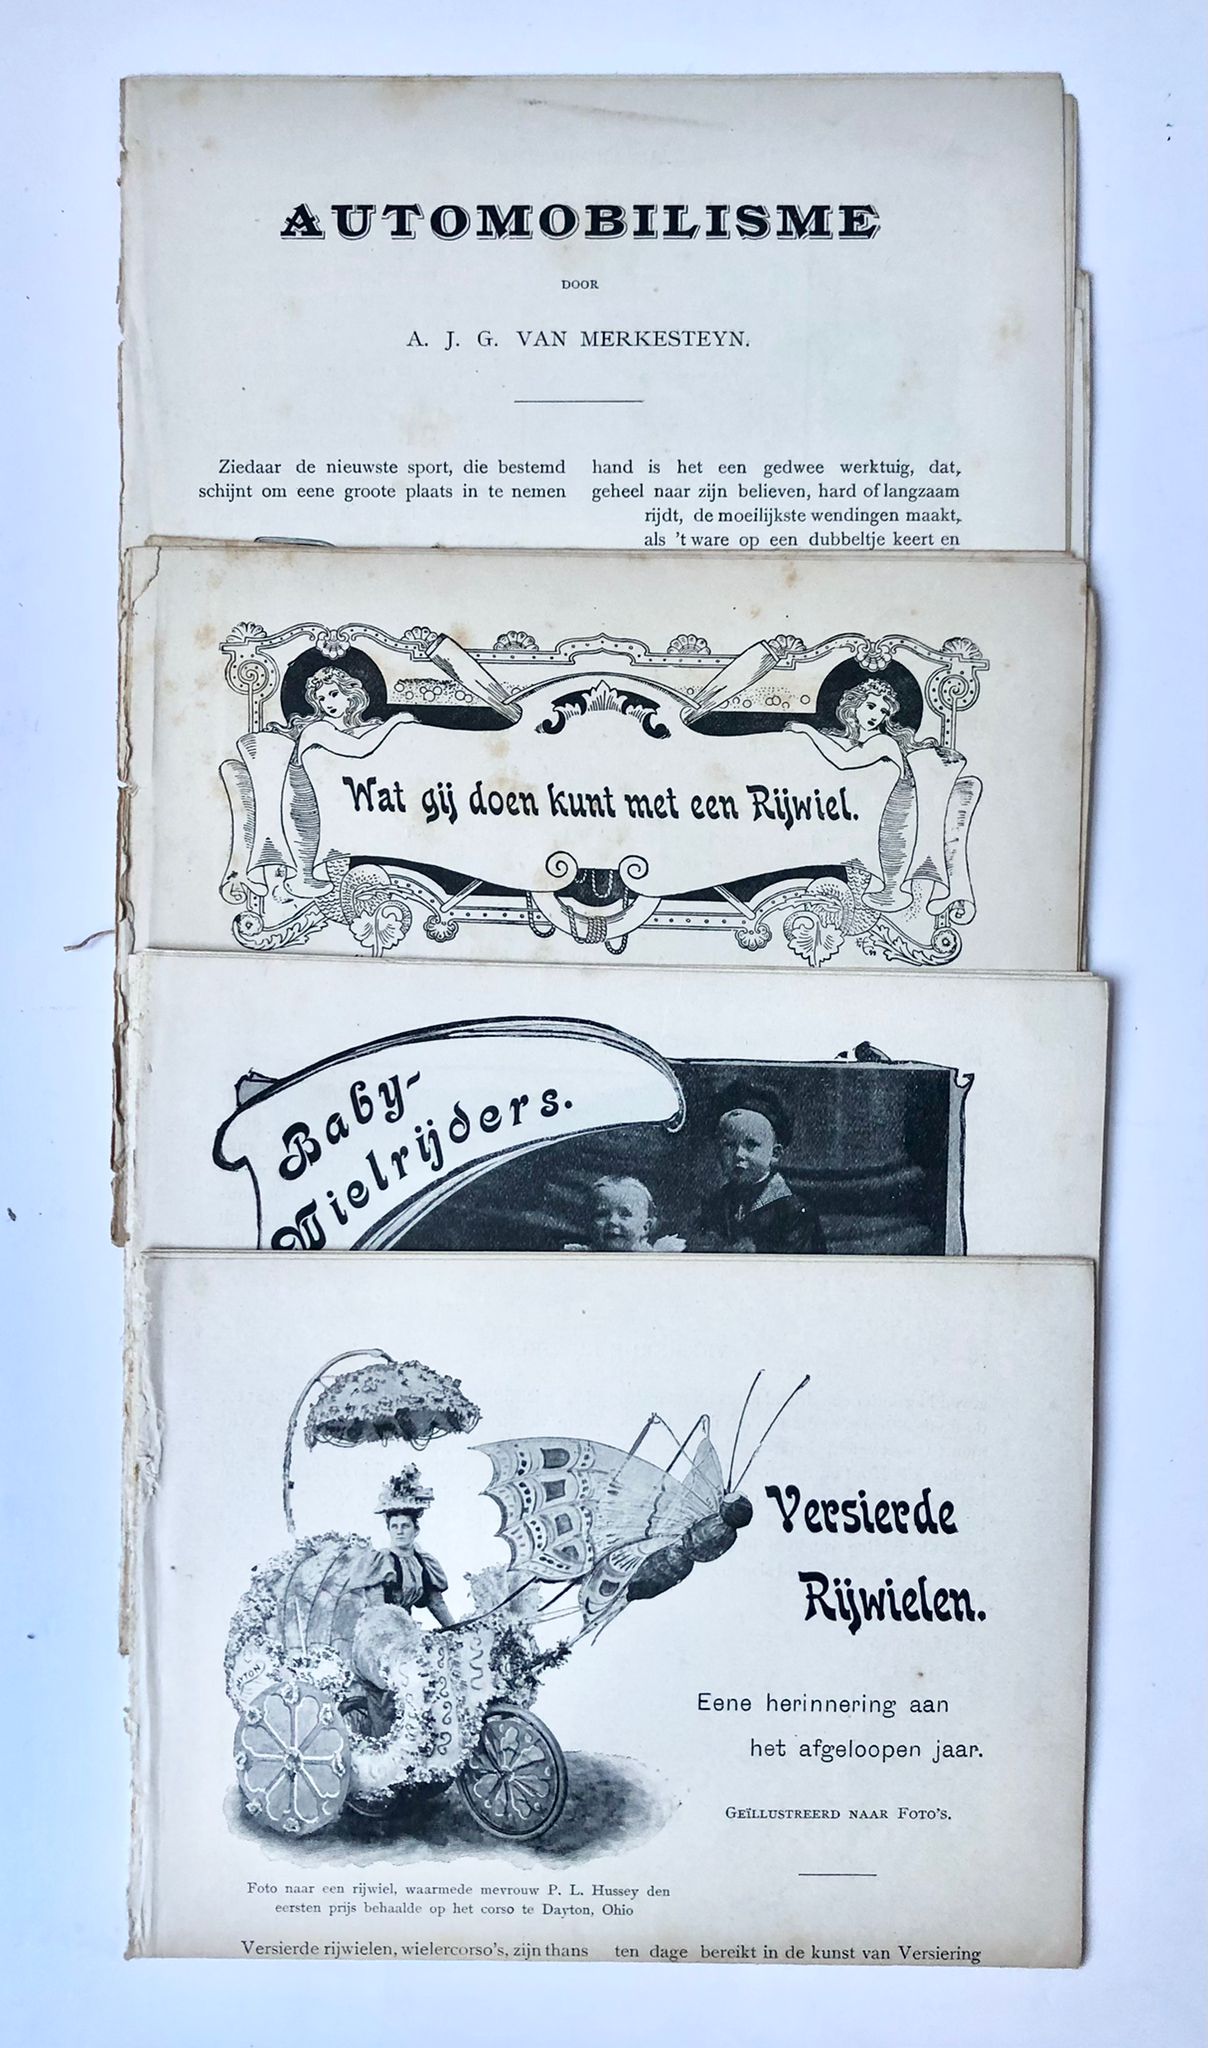 [Printed publications, Bicycles, bikes, 20th century] Five brochures about cycling, bikes, bicycles, and bicycle factory (fietsfabriek en fietsen), illustrated.